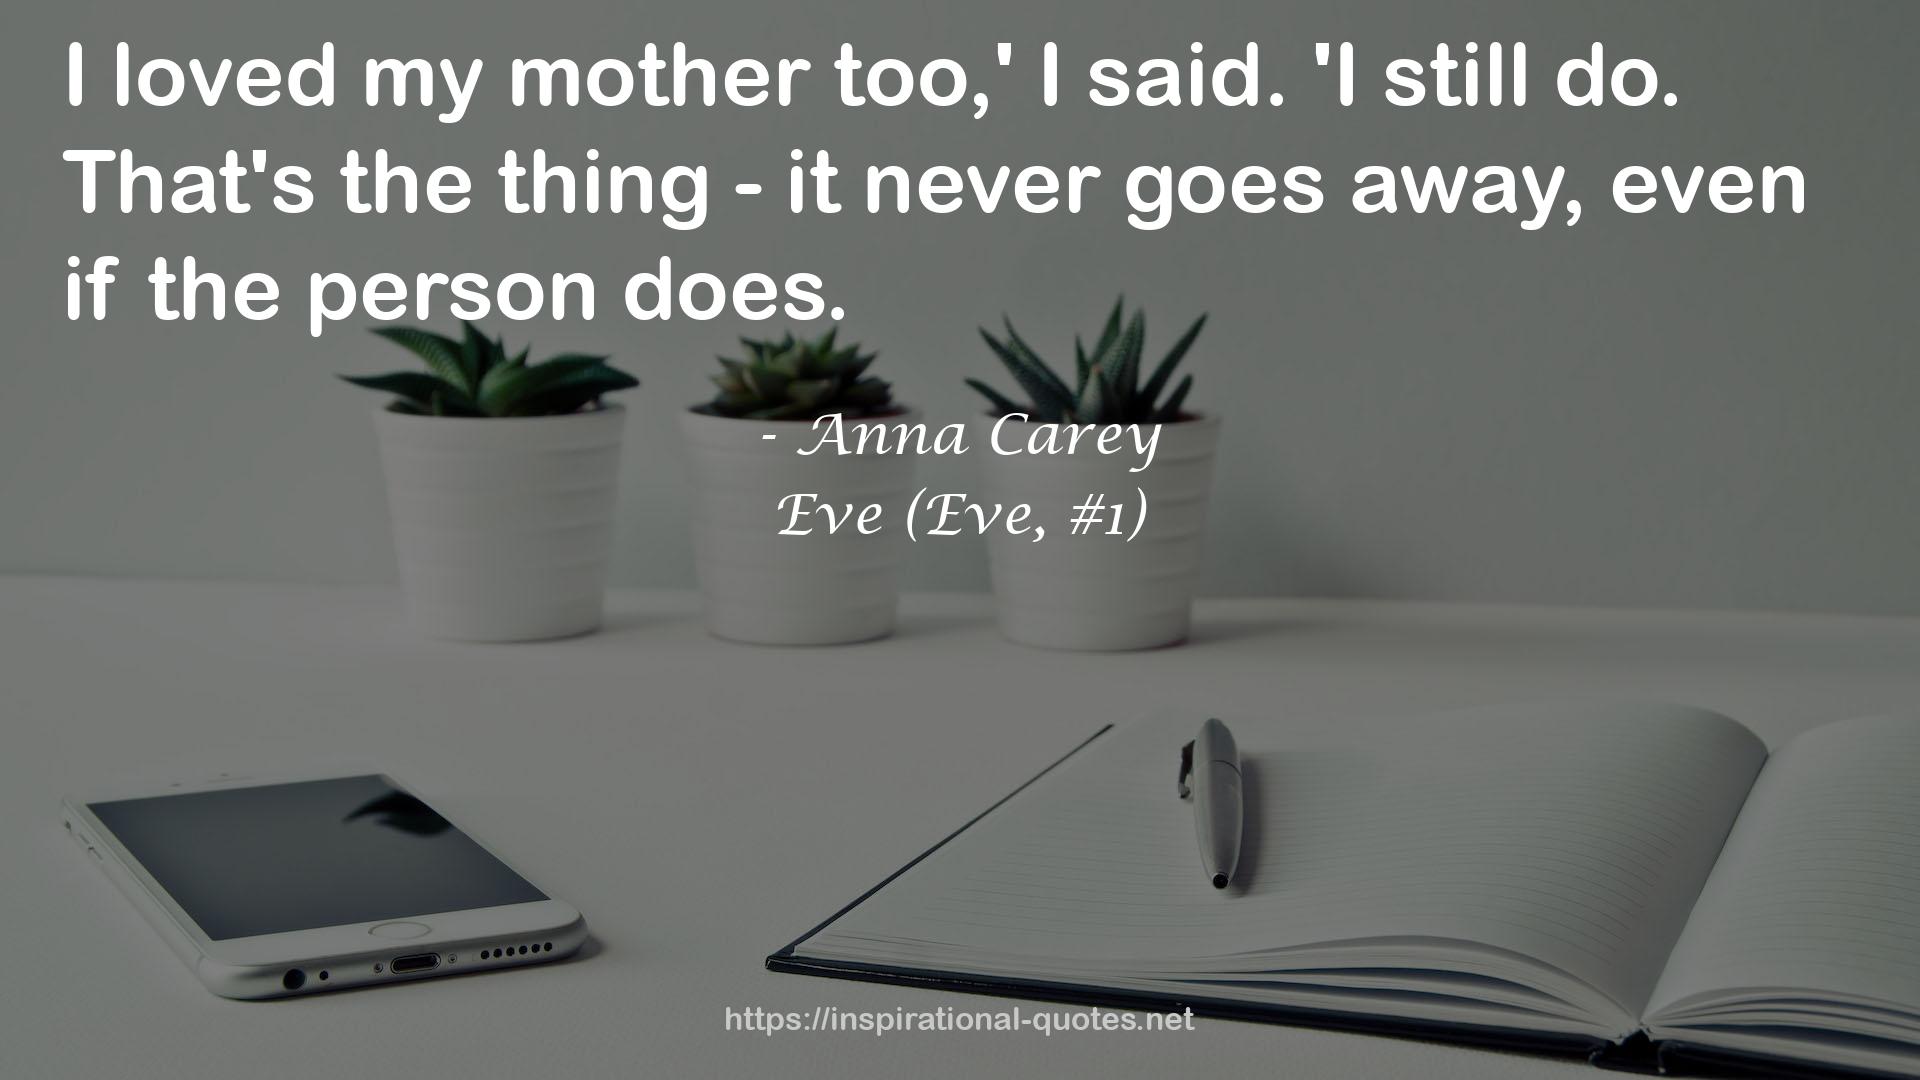 Eve (Eve, #1) QUOTES